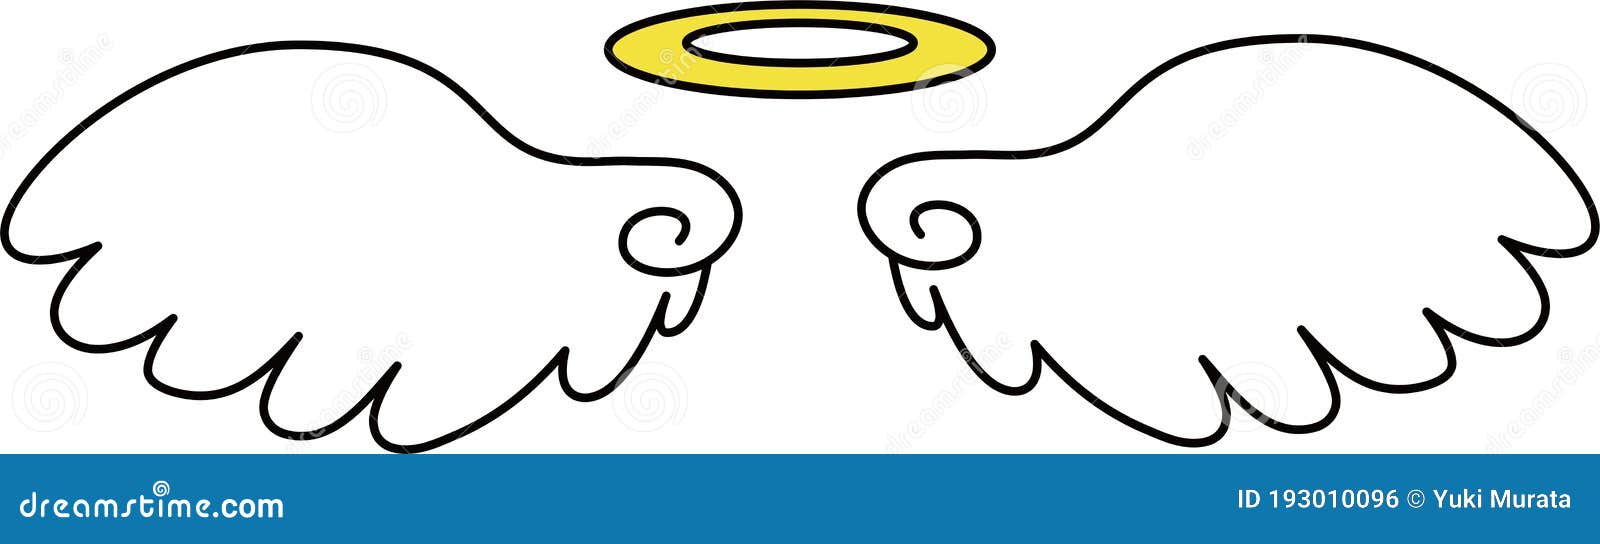 Cute Angel Wings with Angel Ring Stock Vector - Illustration of neat ...